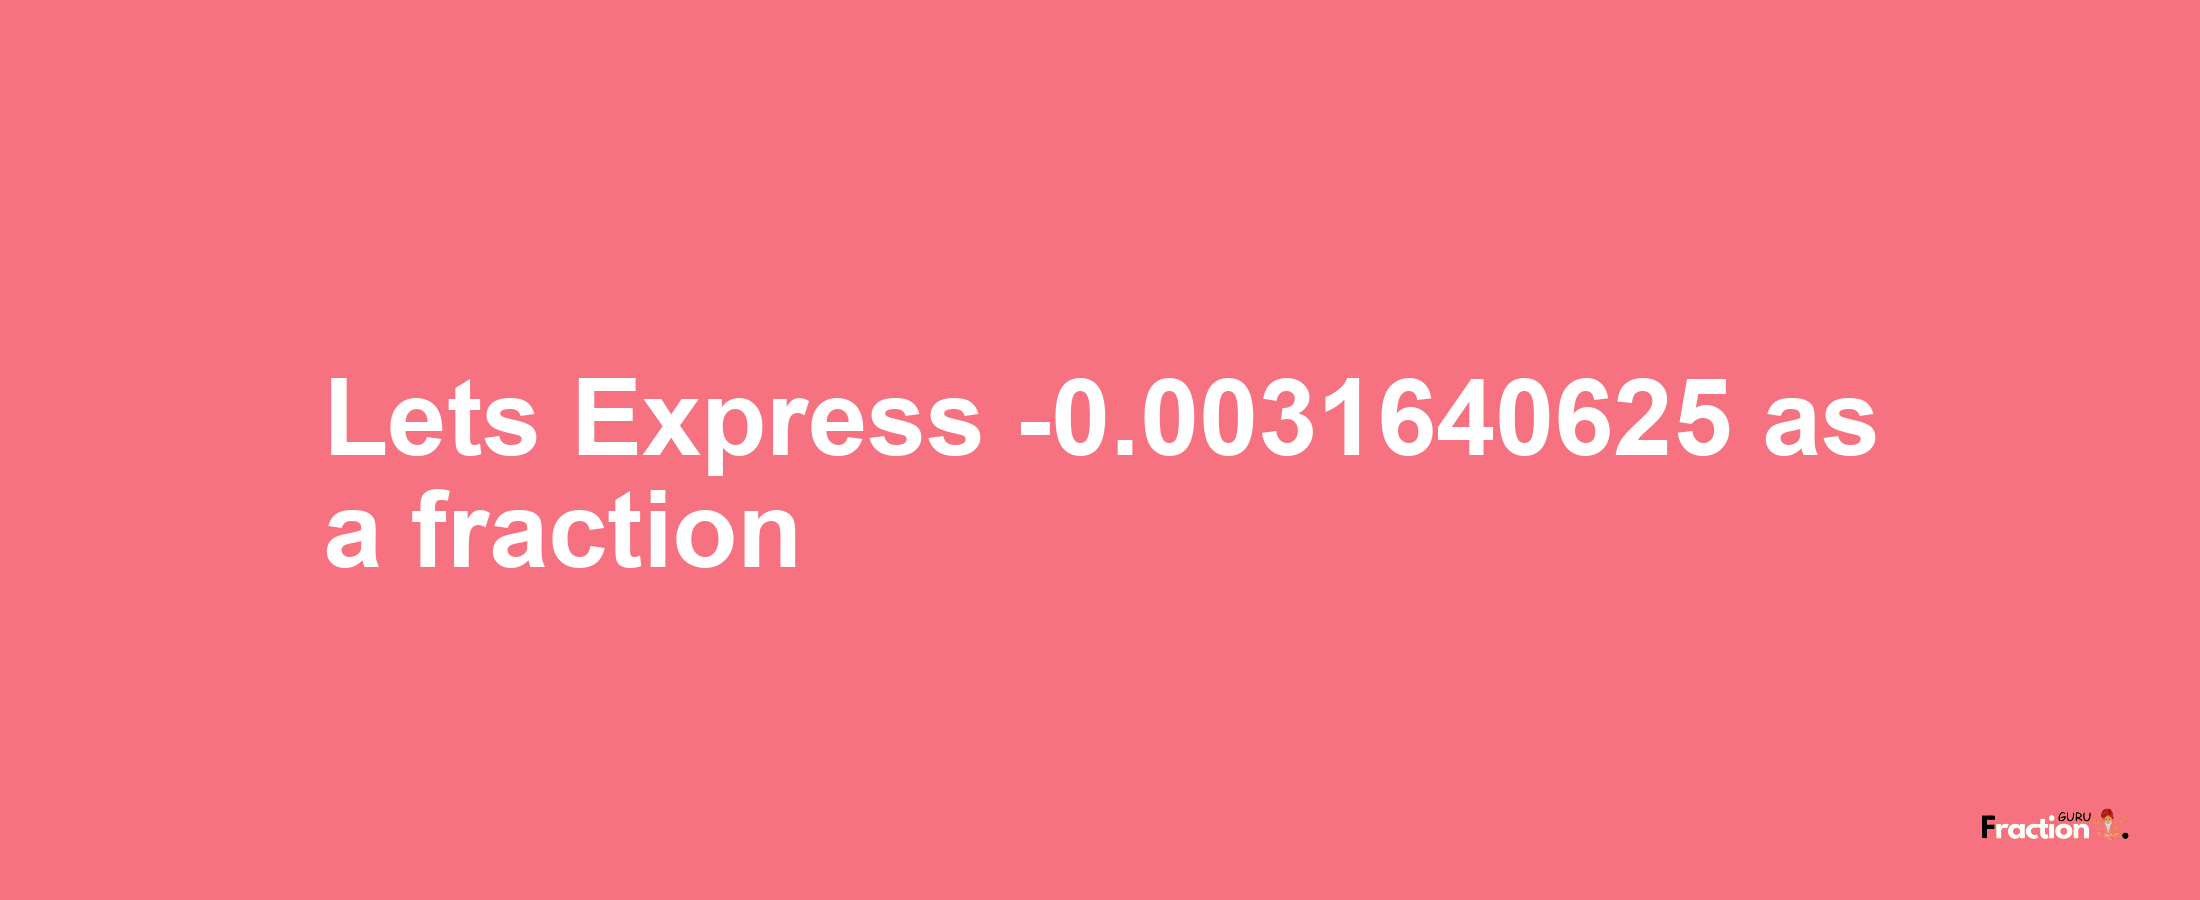 Lets Express -0.0031640625 as afraction